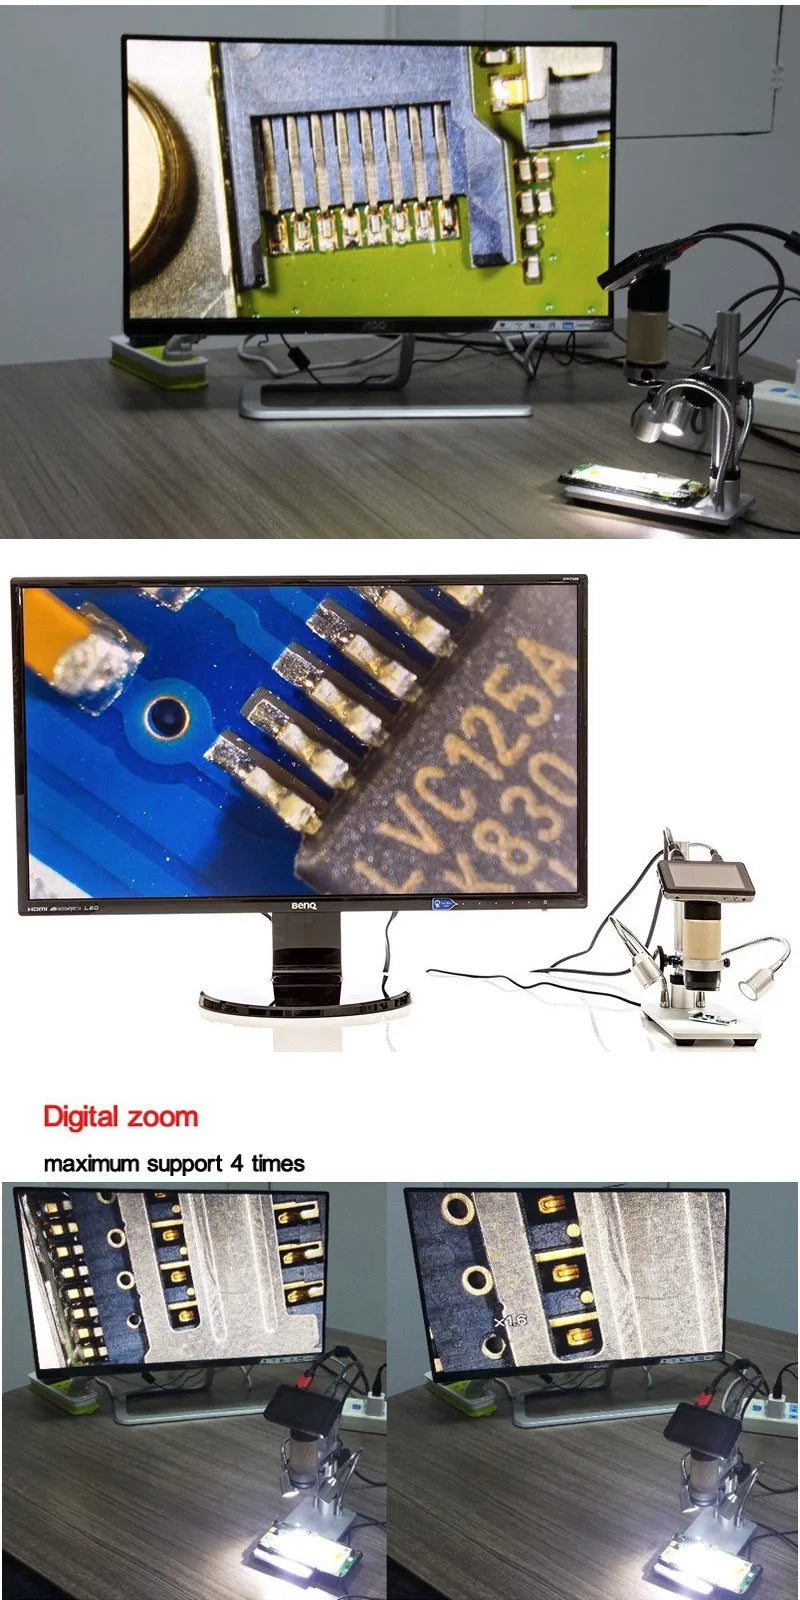 Andonstar ADSM201 1080P Full HD USB Microscope with HDMI Output